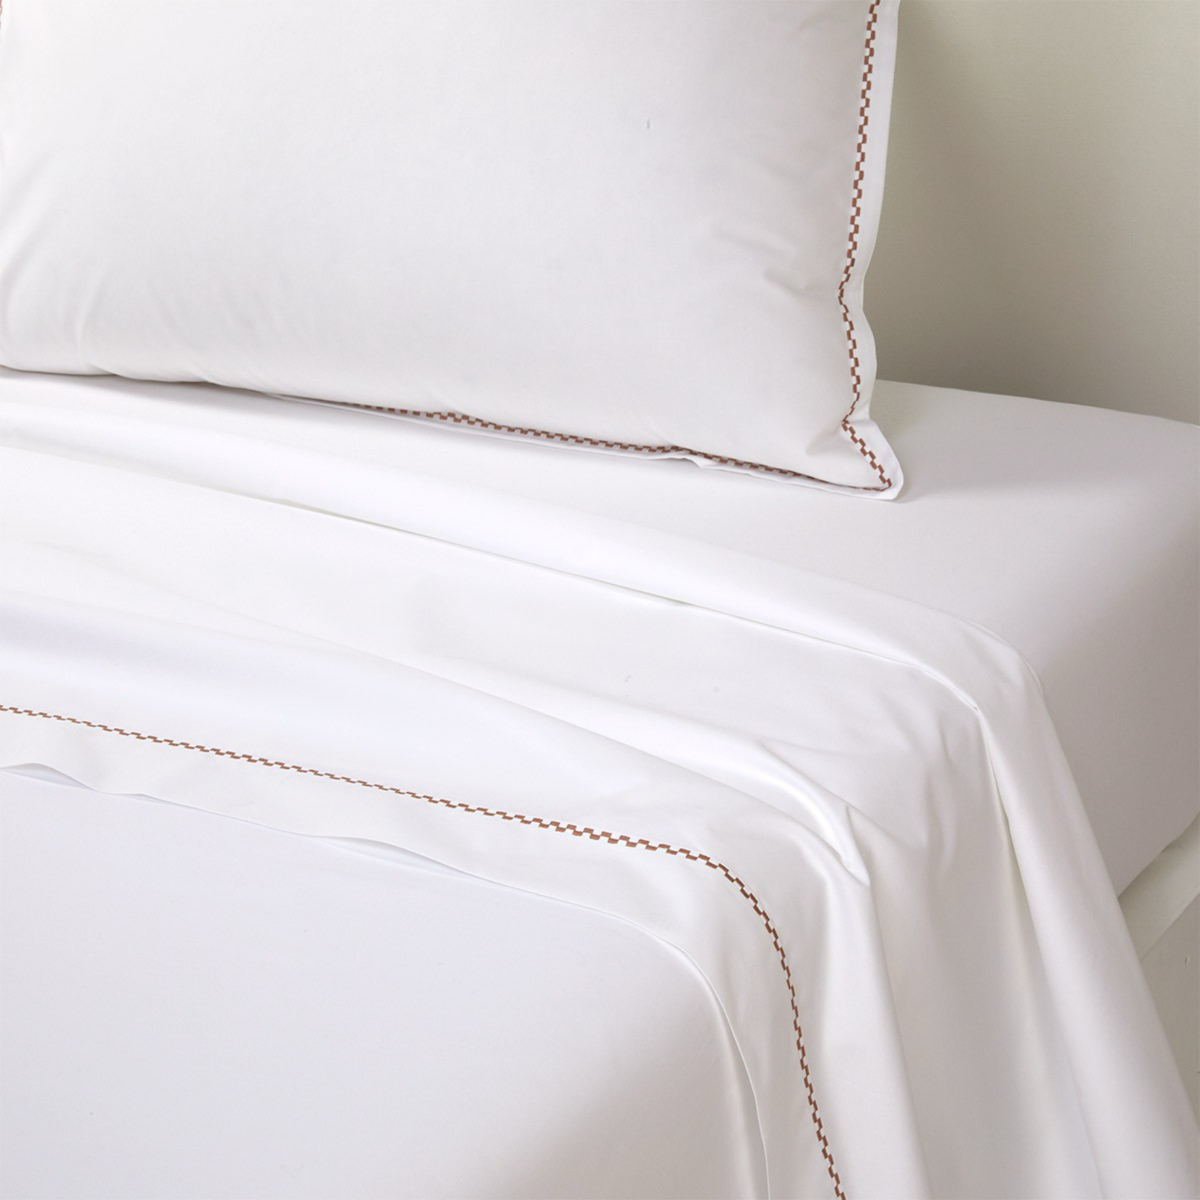 Flat Sheet of Yves Delorme Alienor Bedding in Sienna Color